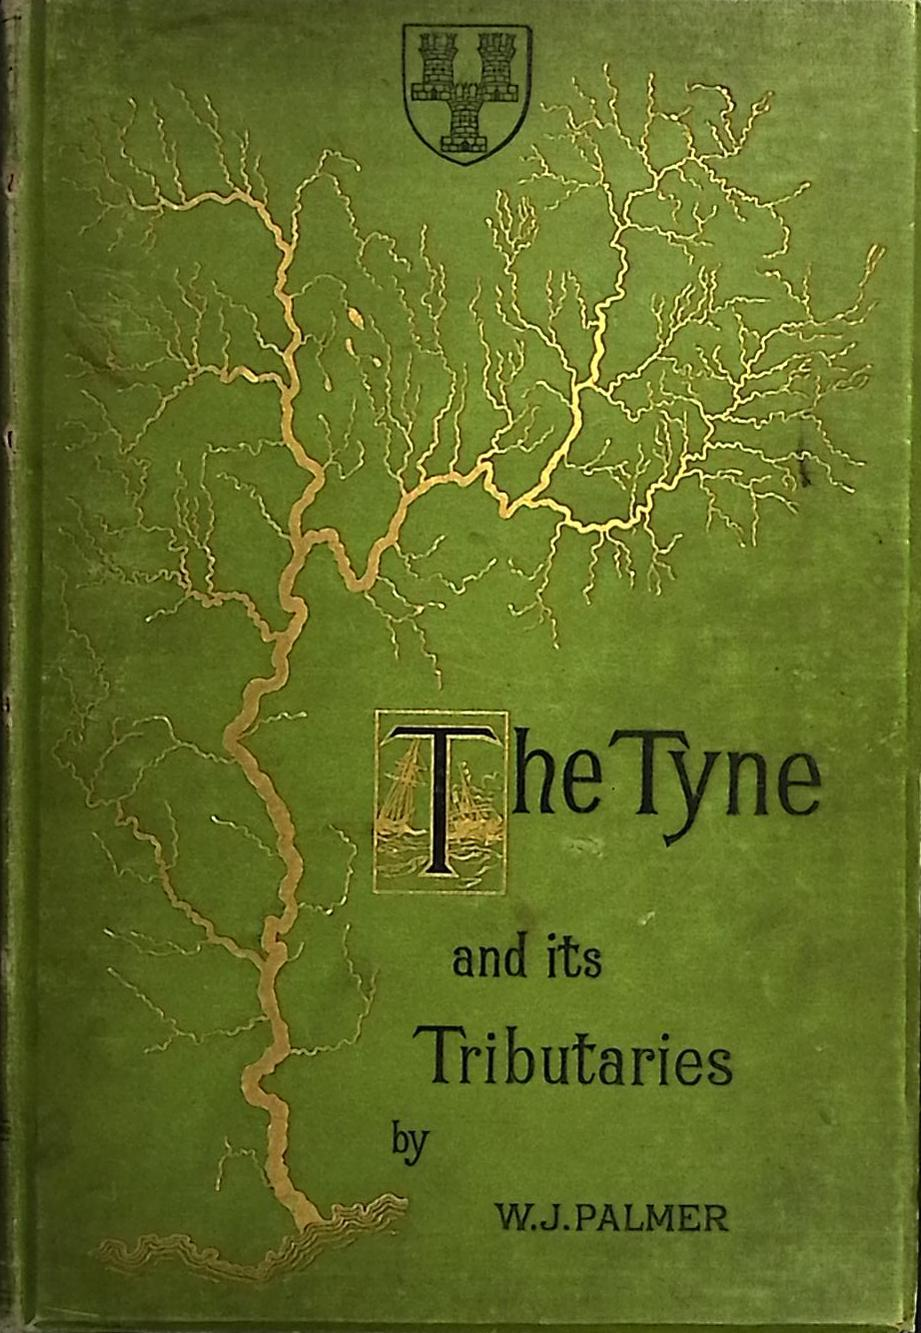 The Tyne and its Tributaries